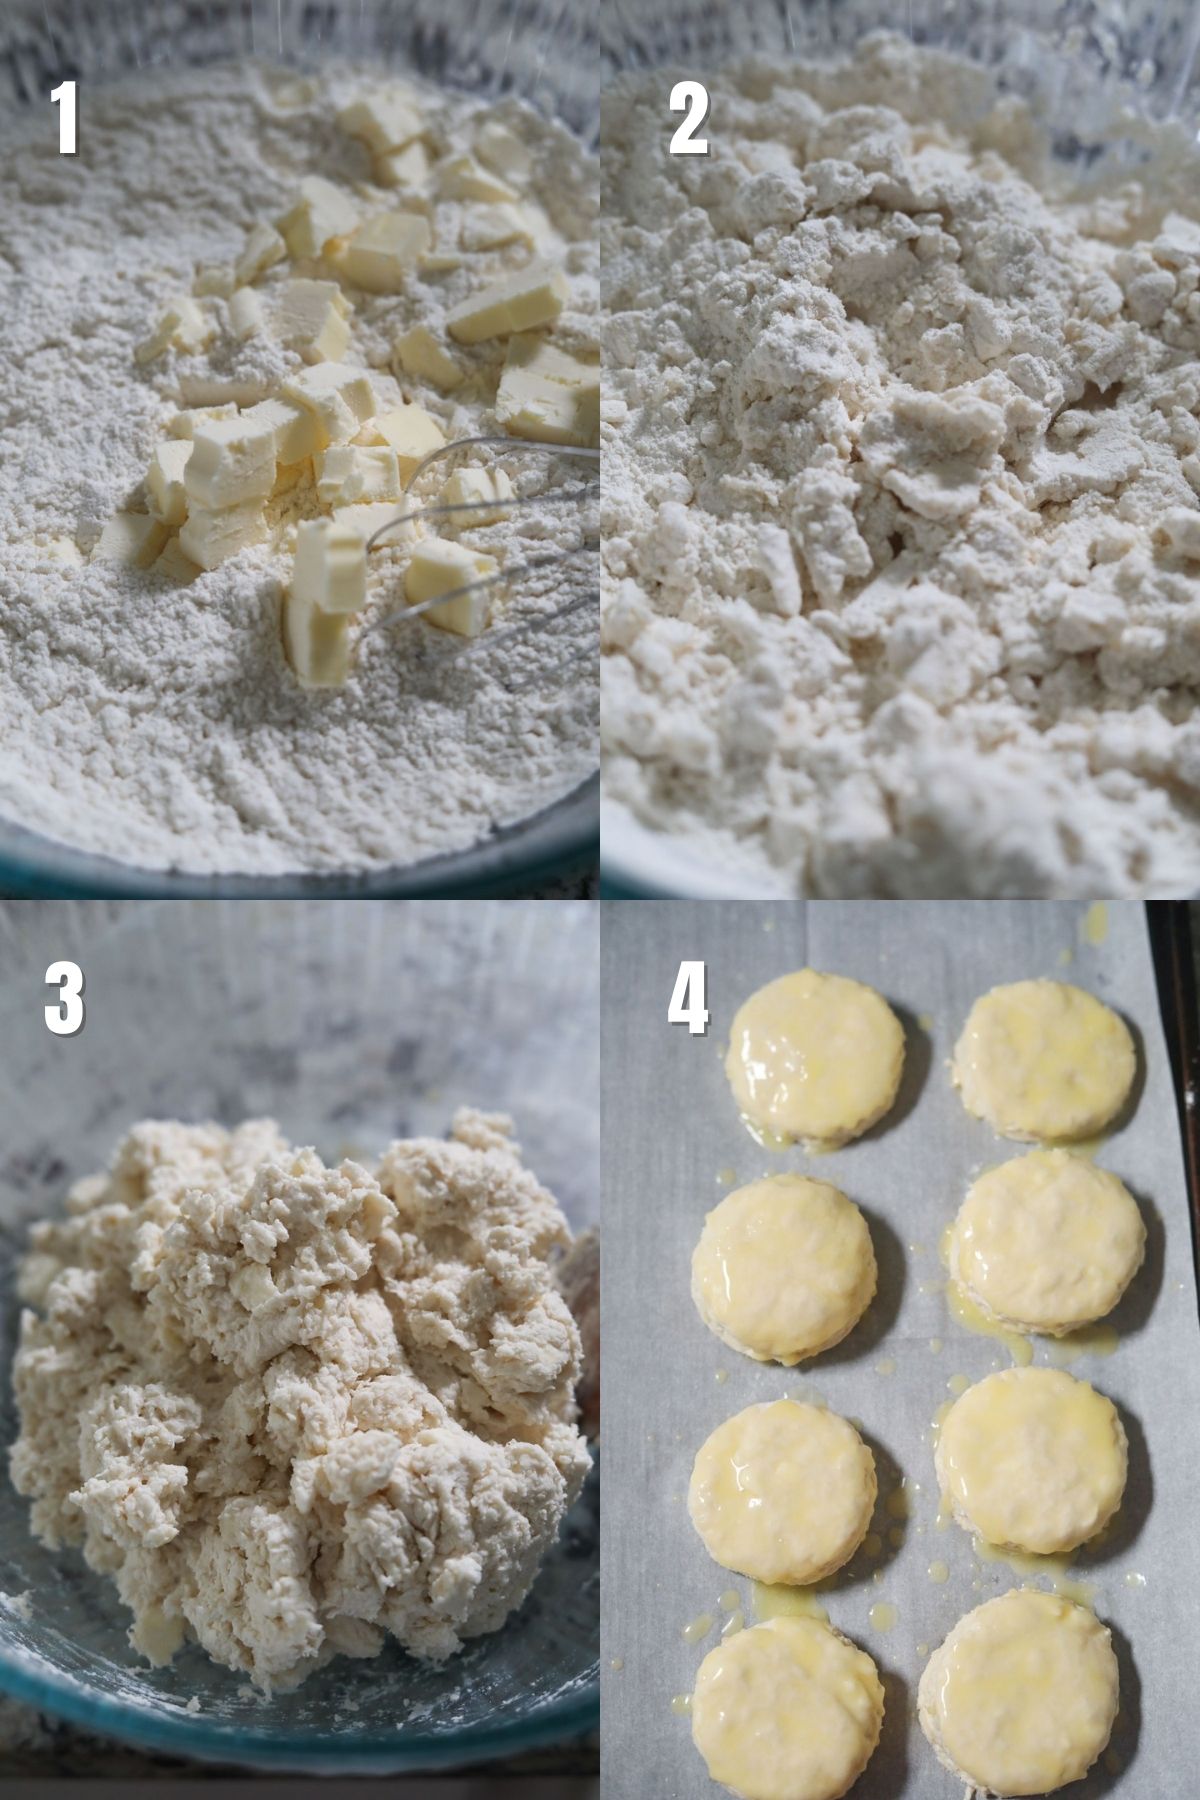 Step by step images for making southern buttermilk biscuits.